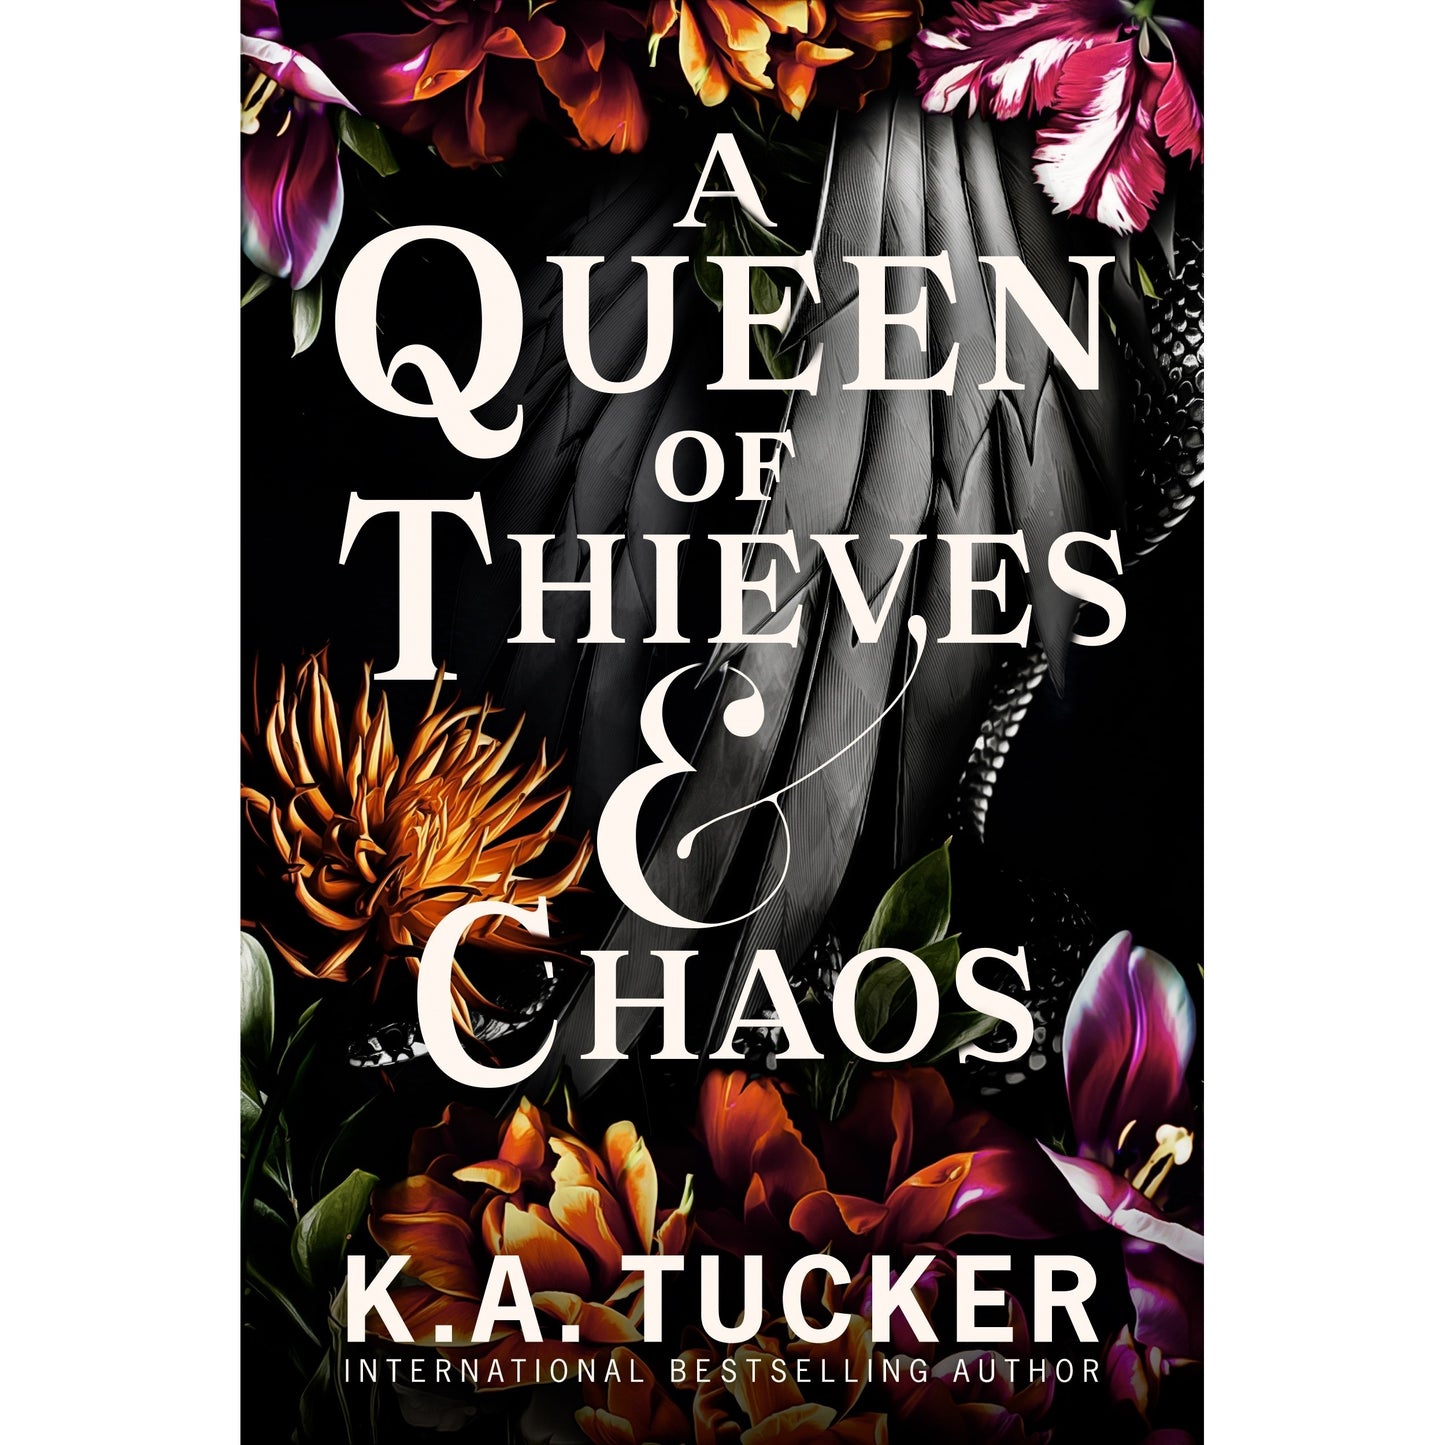 A Queen of Thieves and Chaos (Hardback)